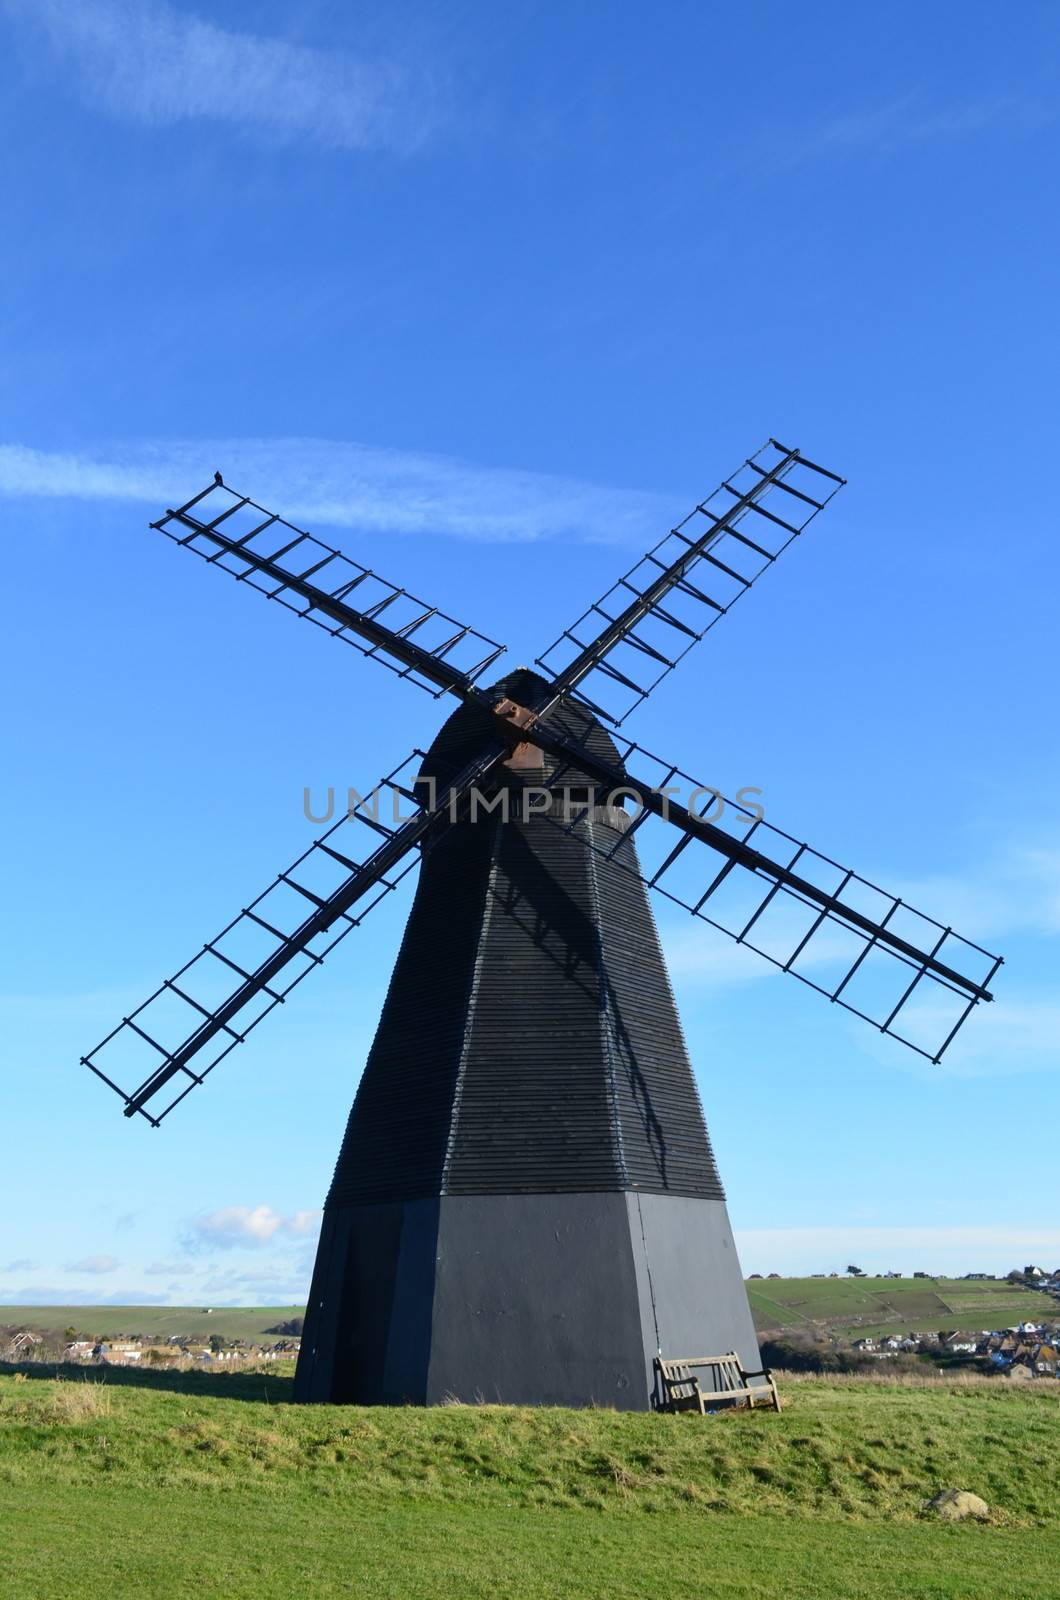 This windmill at Rottingdean near Brighton,Sussex,England was built in 1802 and is one of the oldest mills in the County.